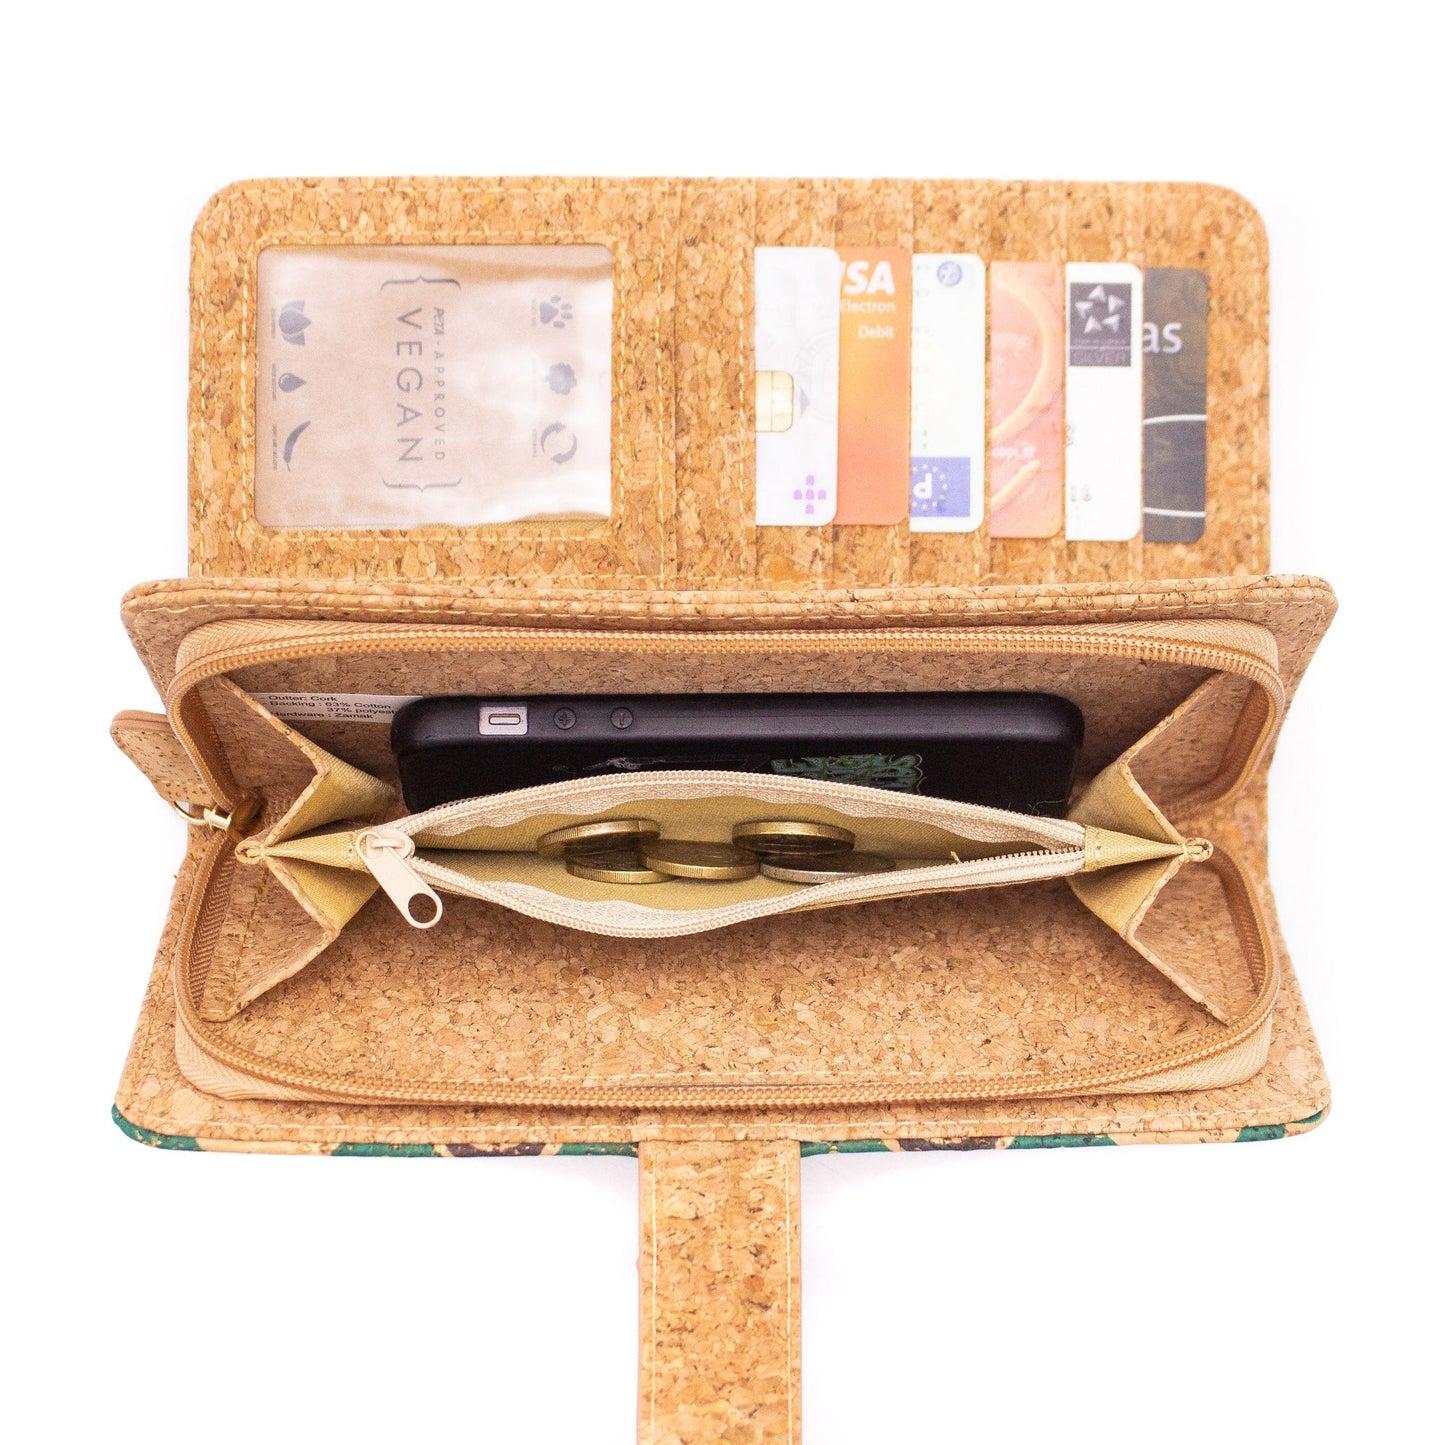 Orange & Silver with magnet closure Cork Wallet | THE CORK COLLECTION